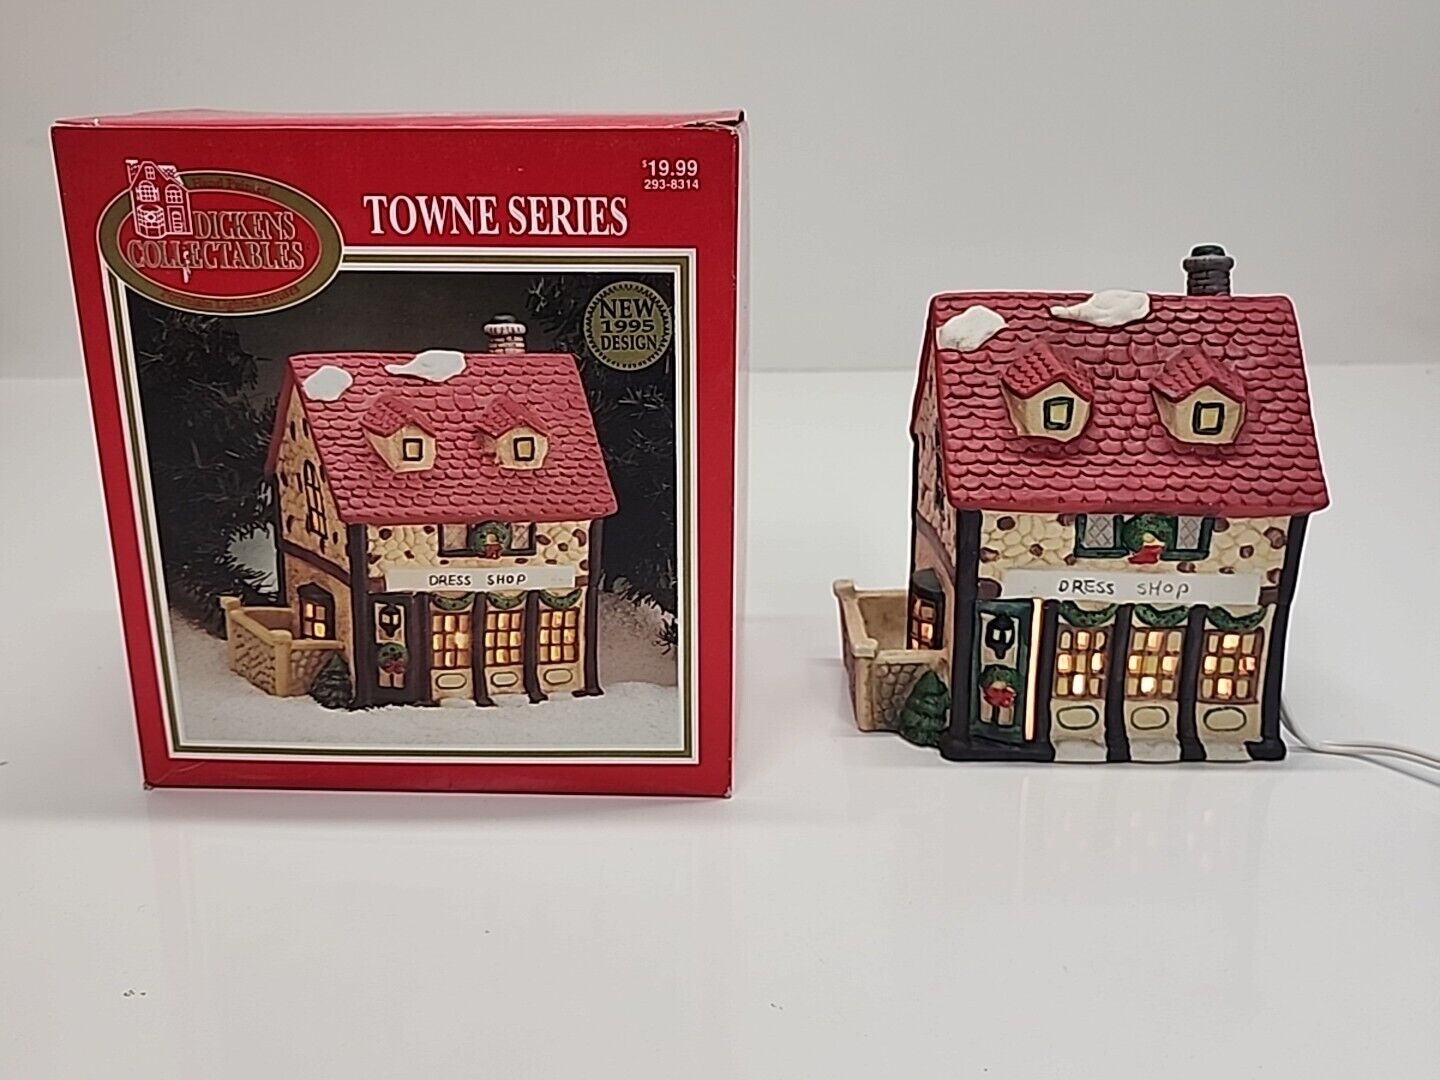 Vintage Dickens Collectables Towne Series Porcelain Lighted DRESS SHOP 1995 Box